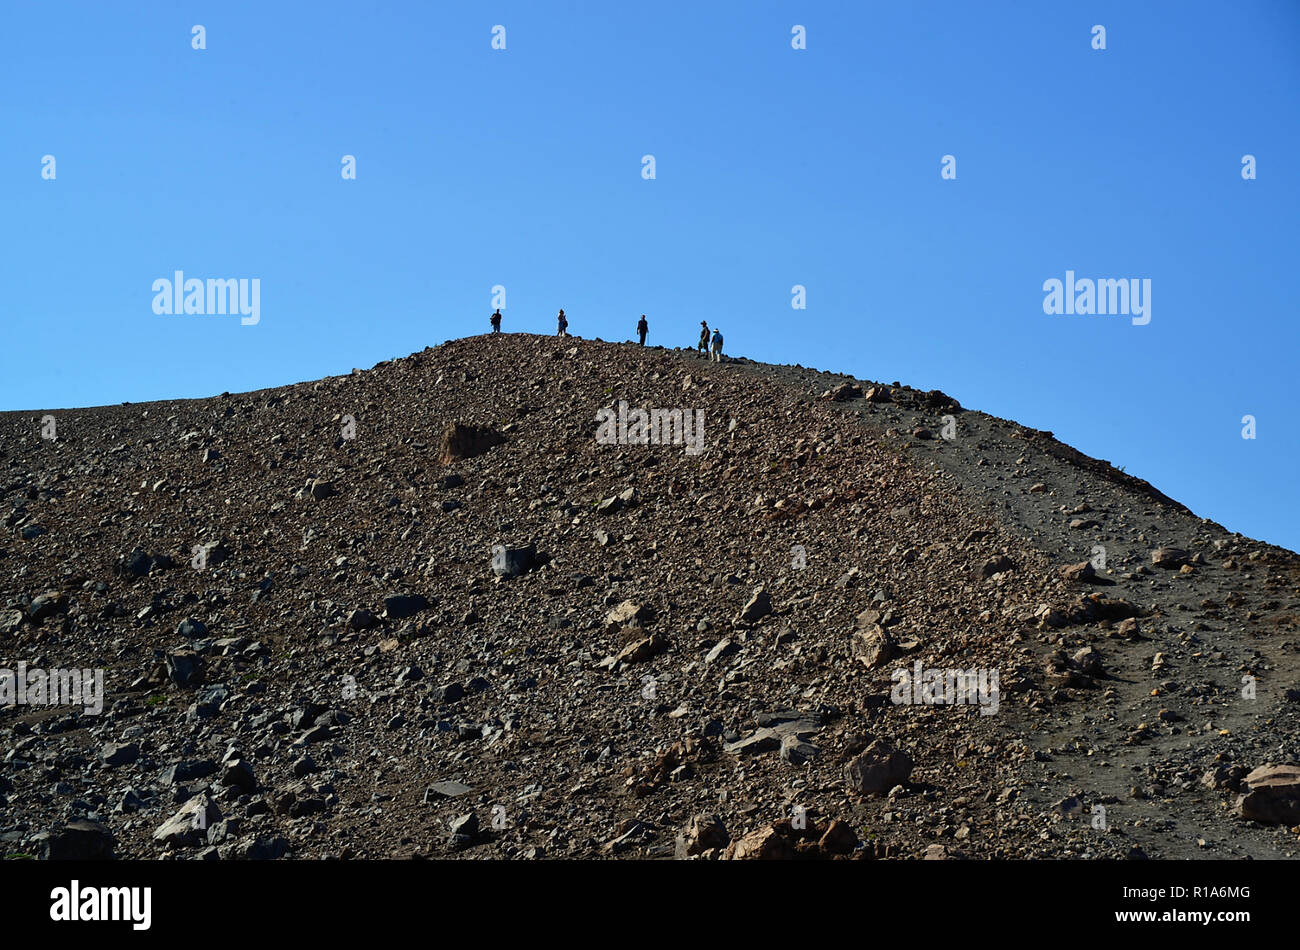 Aeolian islands, Sicily, Italy. Island of Vulcano, hikers visit the Gran Cratere on the top of the volcano. Stock Photo